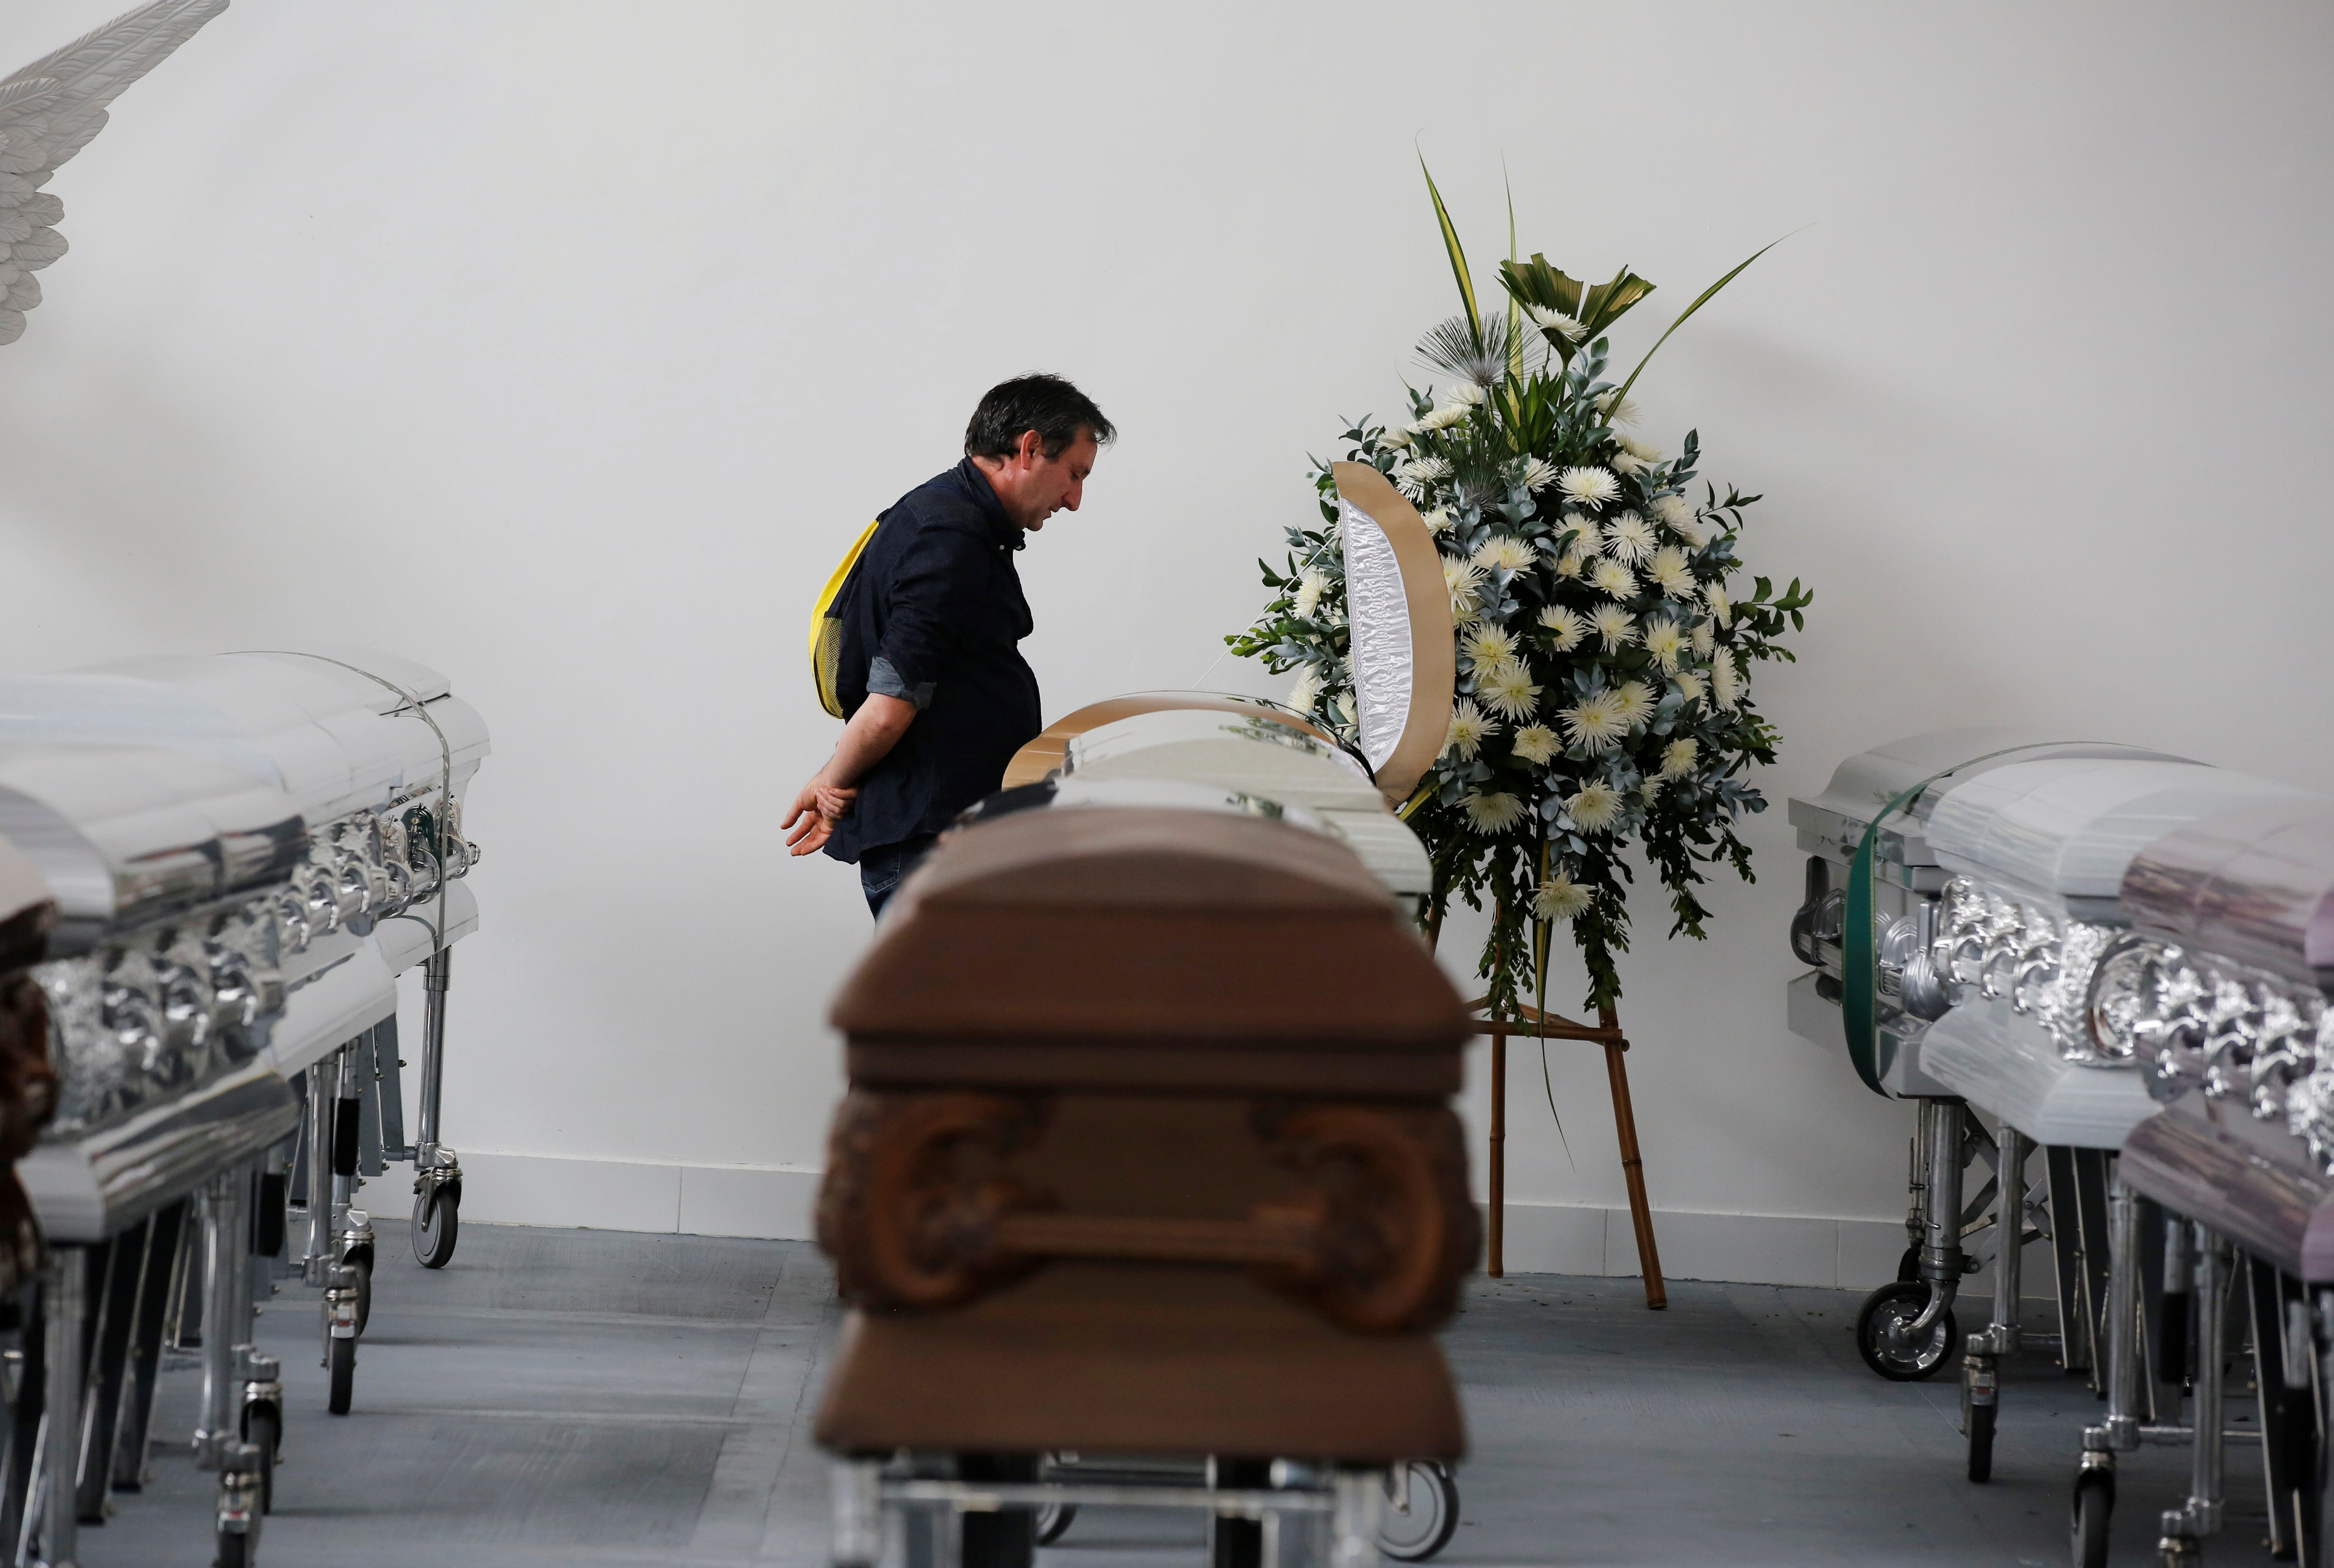 A relative looks into the coffin of Nilson Folle Junior, one of the soccer team's managers and who died along with others in an accident of the plane that crashed into the Colombian jungle with the Brazilian soccer team onboard, in Medellin, Colombia December 1, 2016. REUTERS/Jaime Saldarriaga